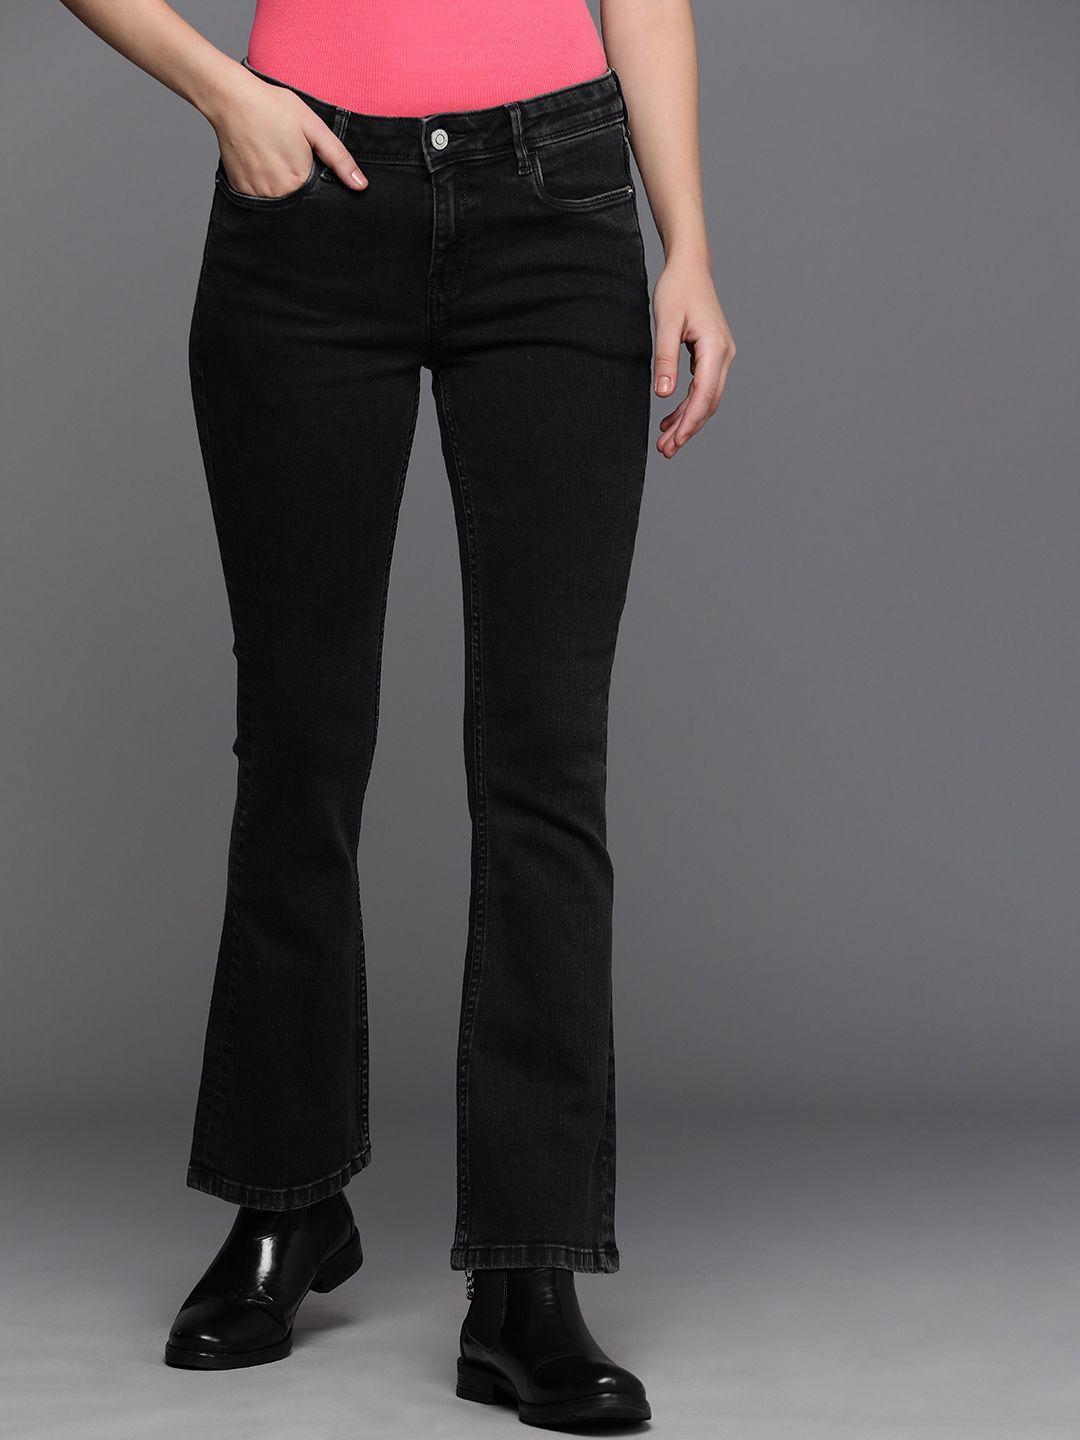 allen solly woman mid-rise light fade stretchable bootcut jeans